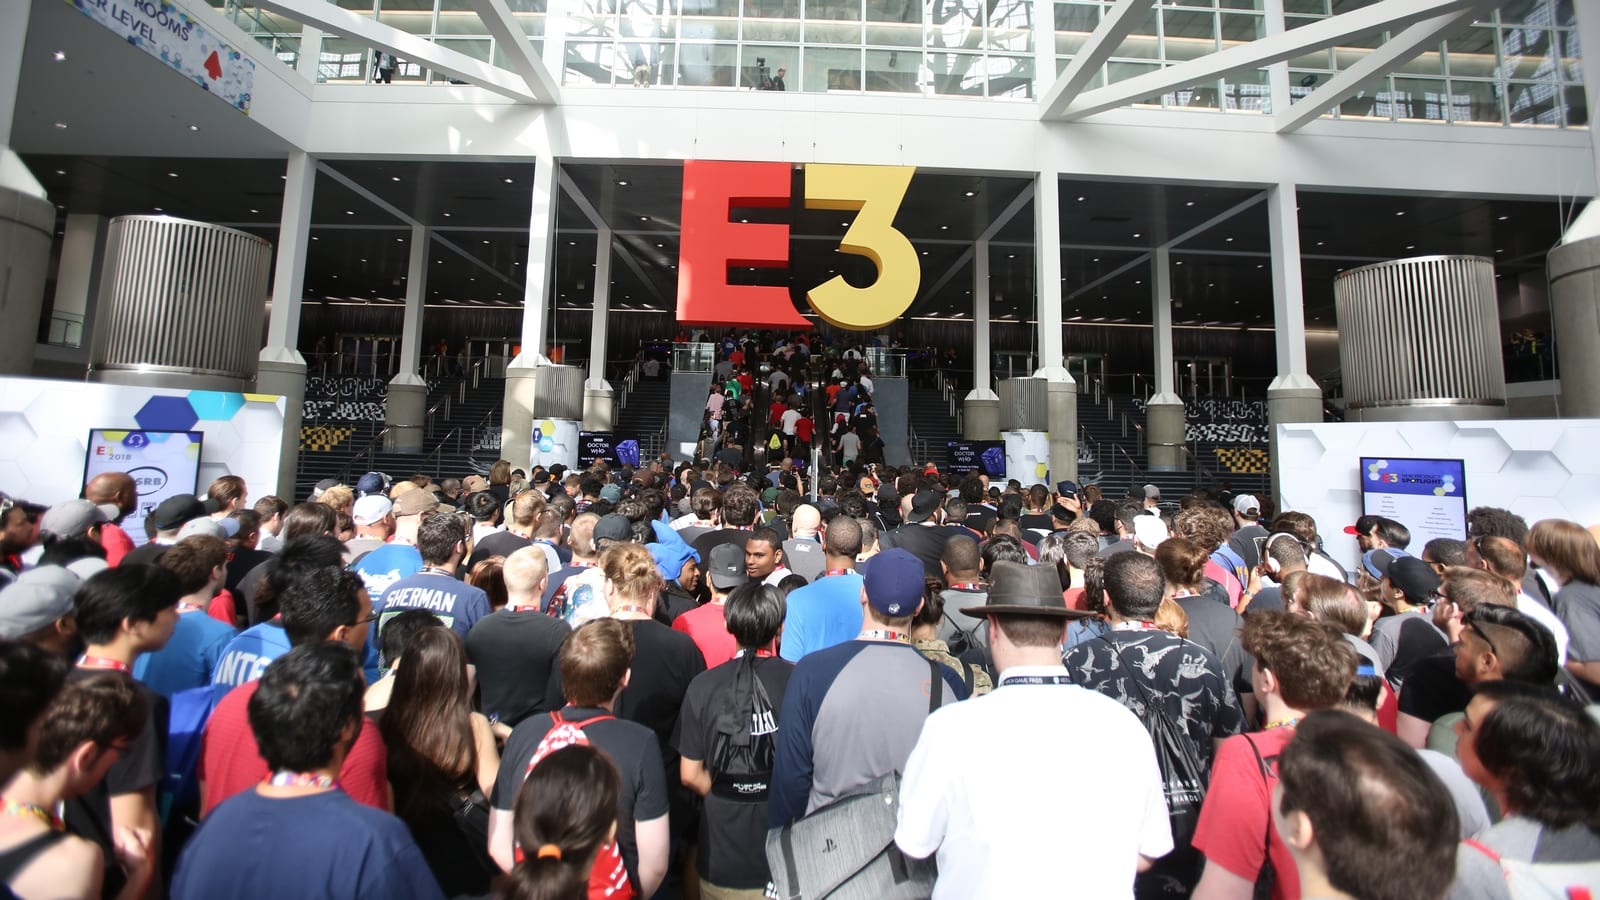 the annual E3 event takes place in person